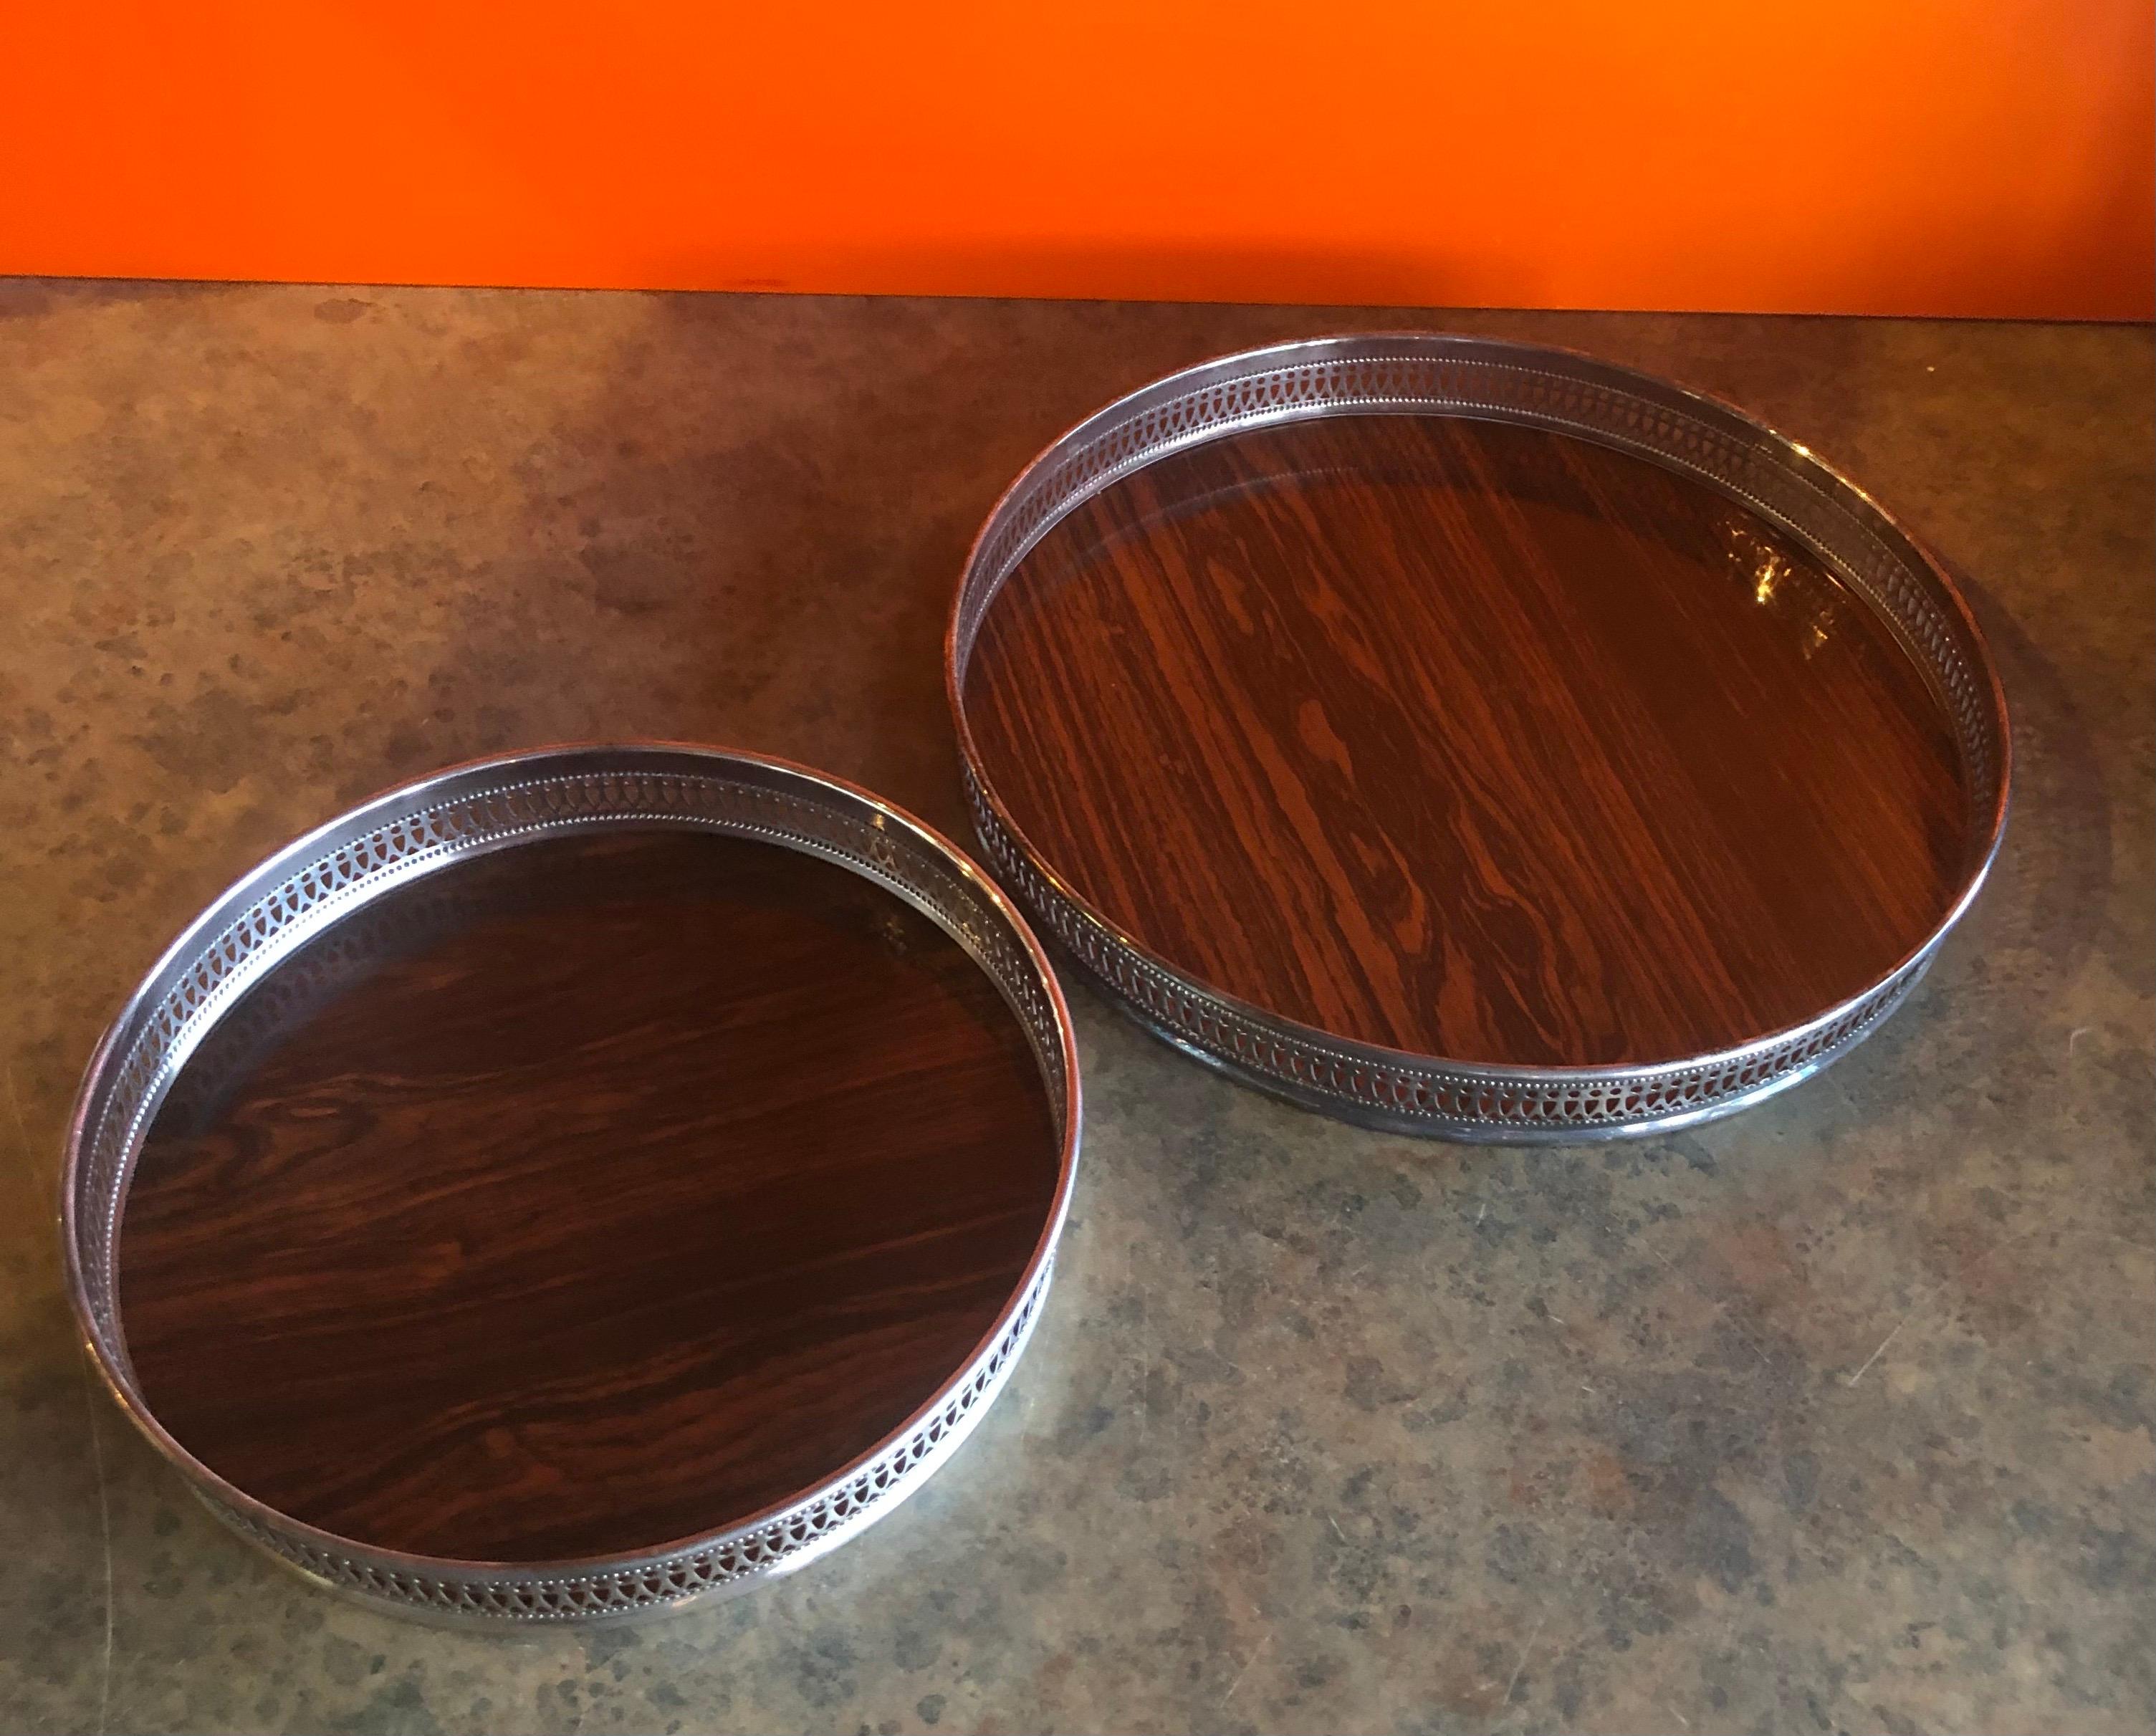 Pair of midcentury rosewood Formica serving trays with silver plate edge by Sheffield Silver Co., circa 1970s. The trays are in very good vintage condition and would be an excellent match with a coffee or tea set. The larger one measures 12.25